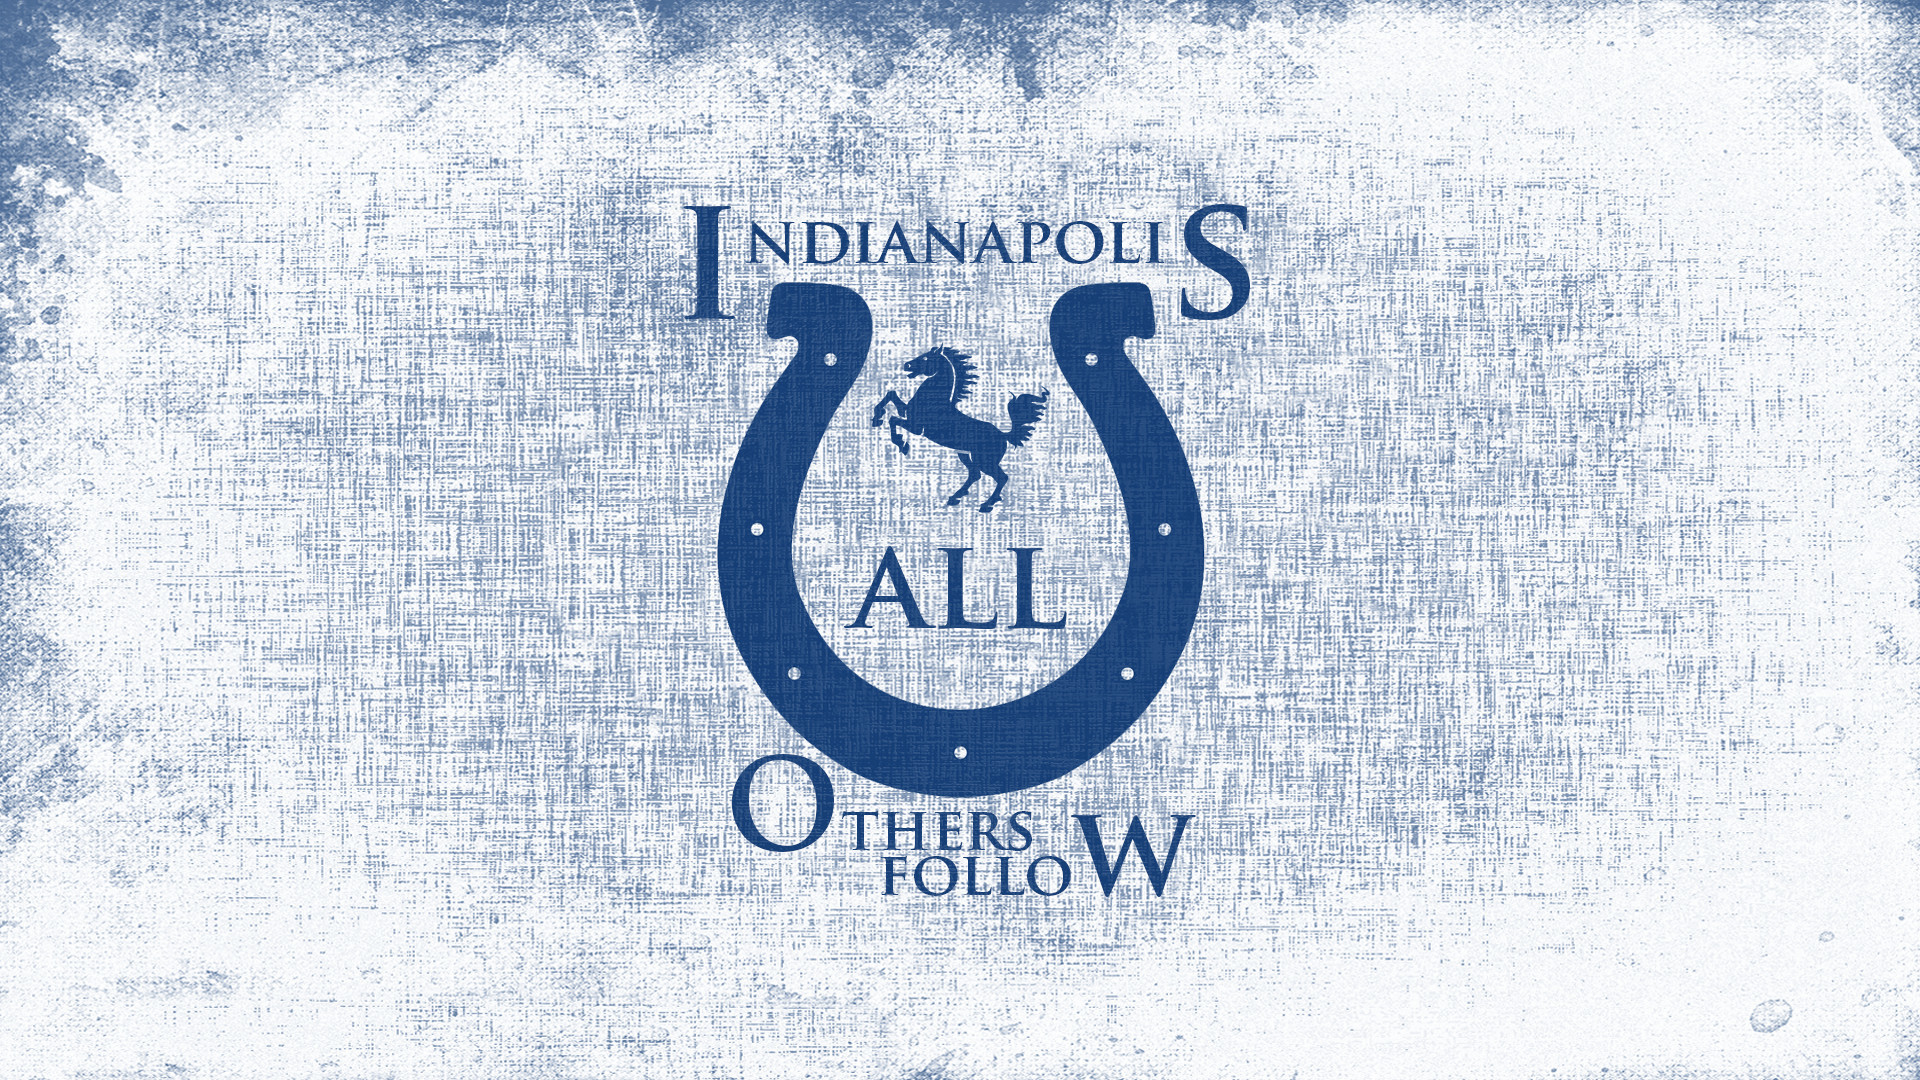 2022 Indianapolis Colts Wallpapers on Behance